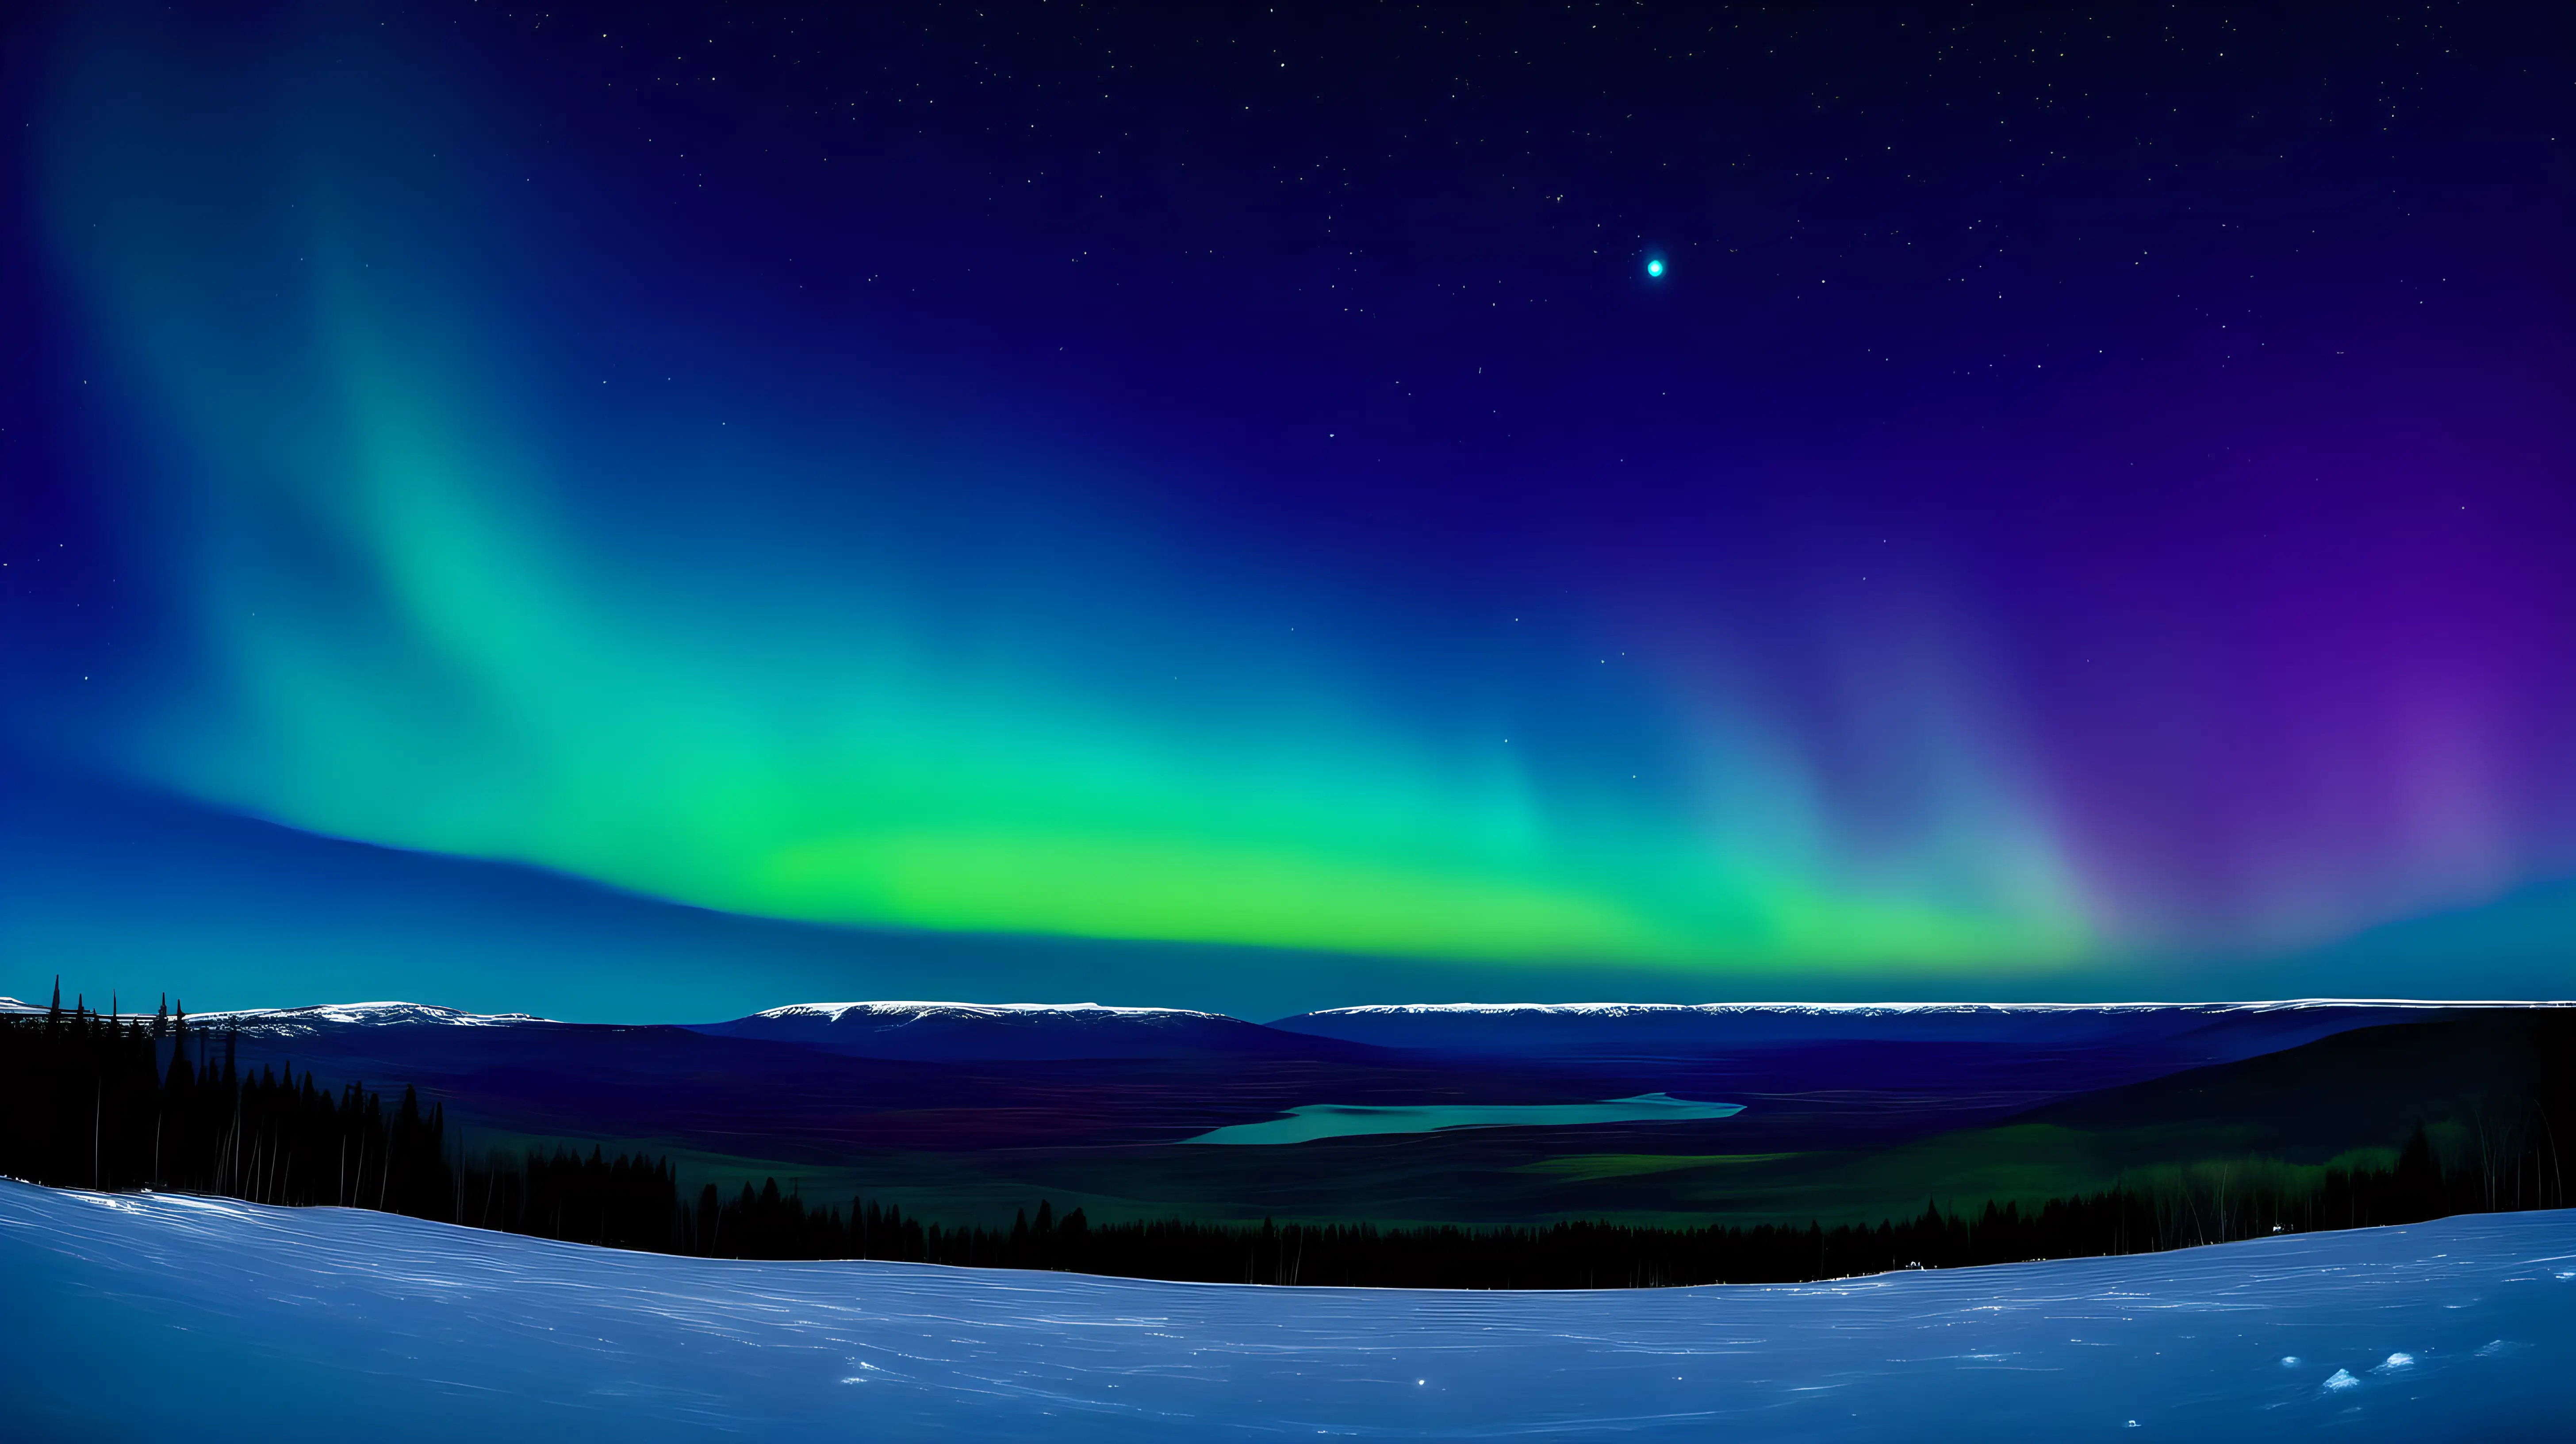 Vibrant Aurora Skies with Full Moon and Stars